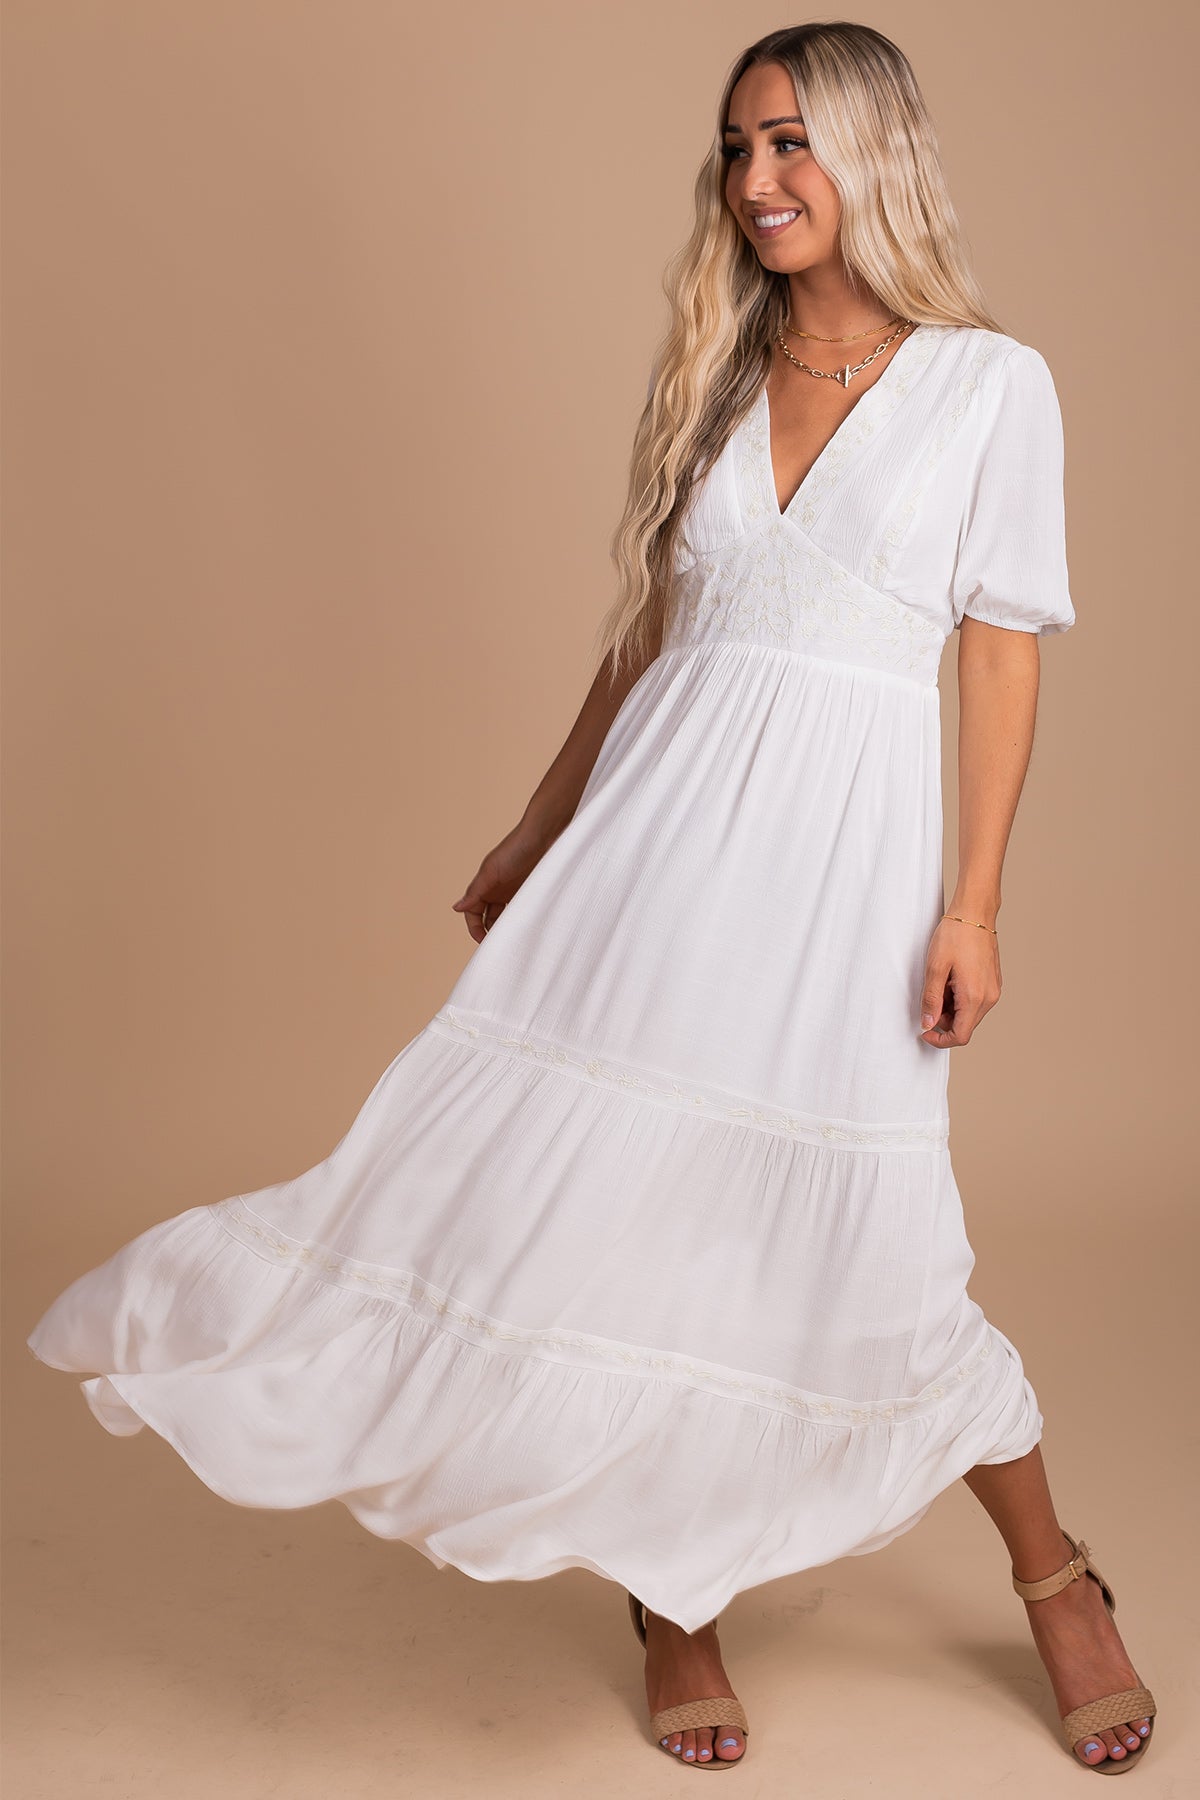 Women's White Dress with Cream Lace Details